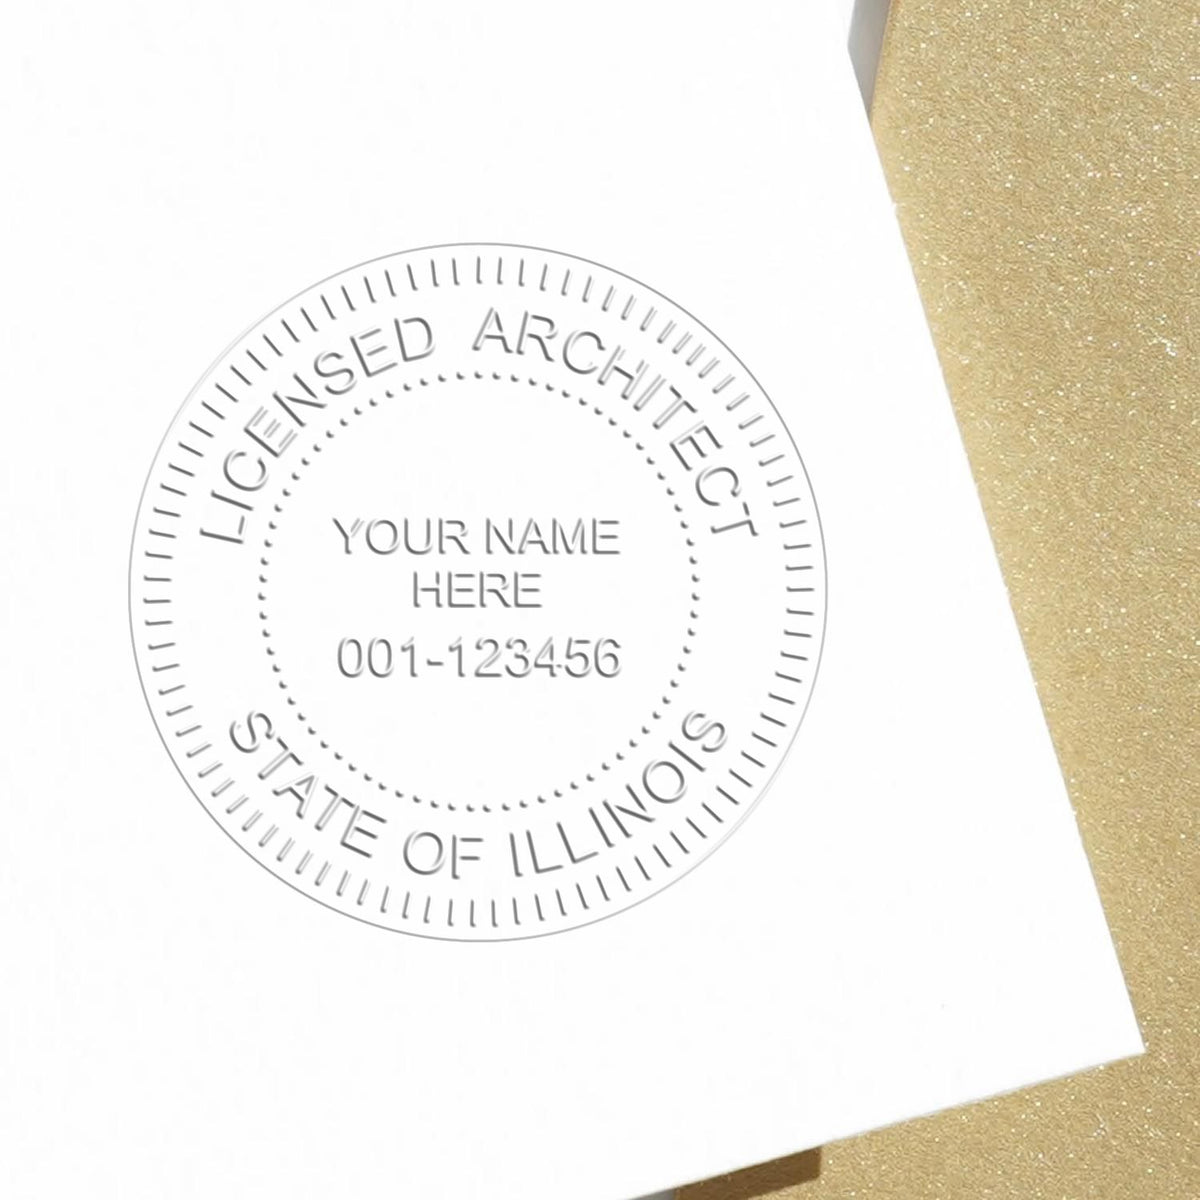 An alternative view of the State of Illinois Long Reach Architectural Embossing Seal stamped on a sheet of paper showing the image in use